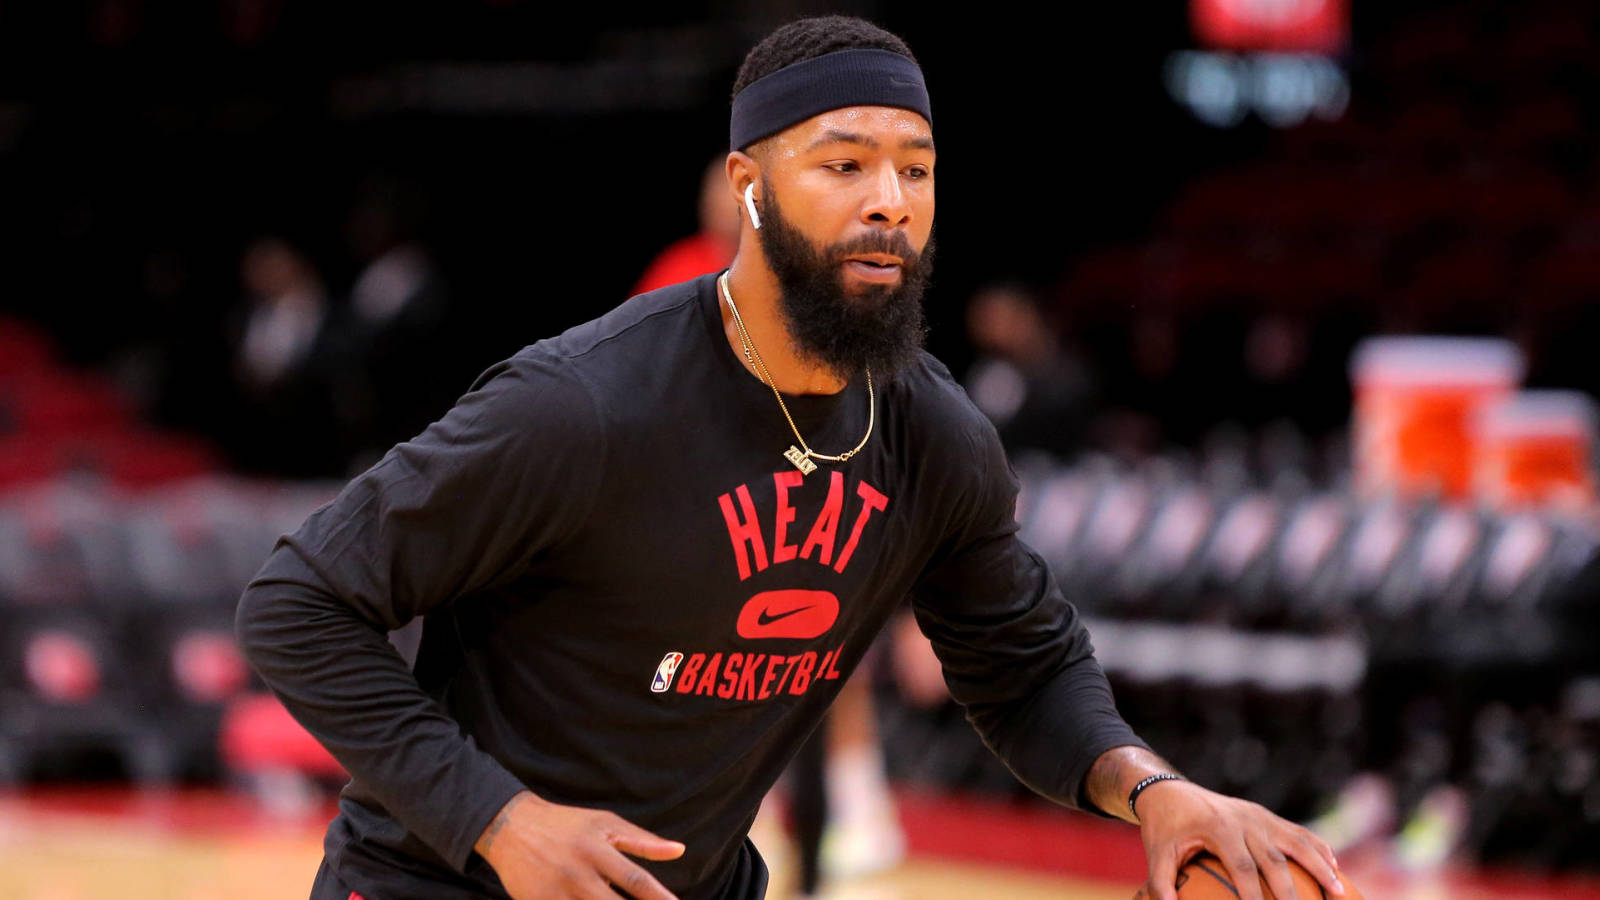 Heat unwilling to clear Markieff Morris, still have concerns about his neck injury